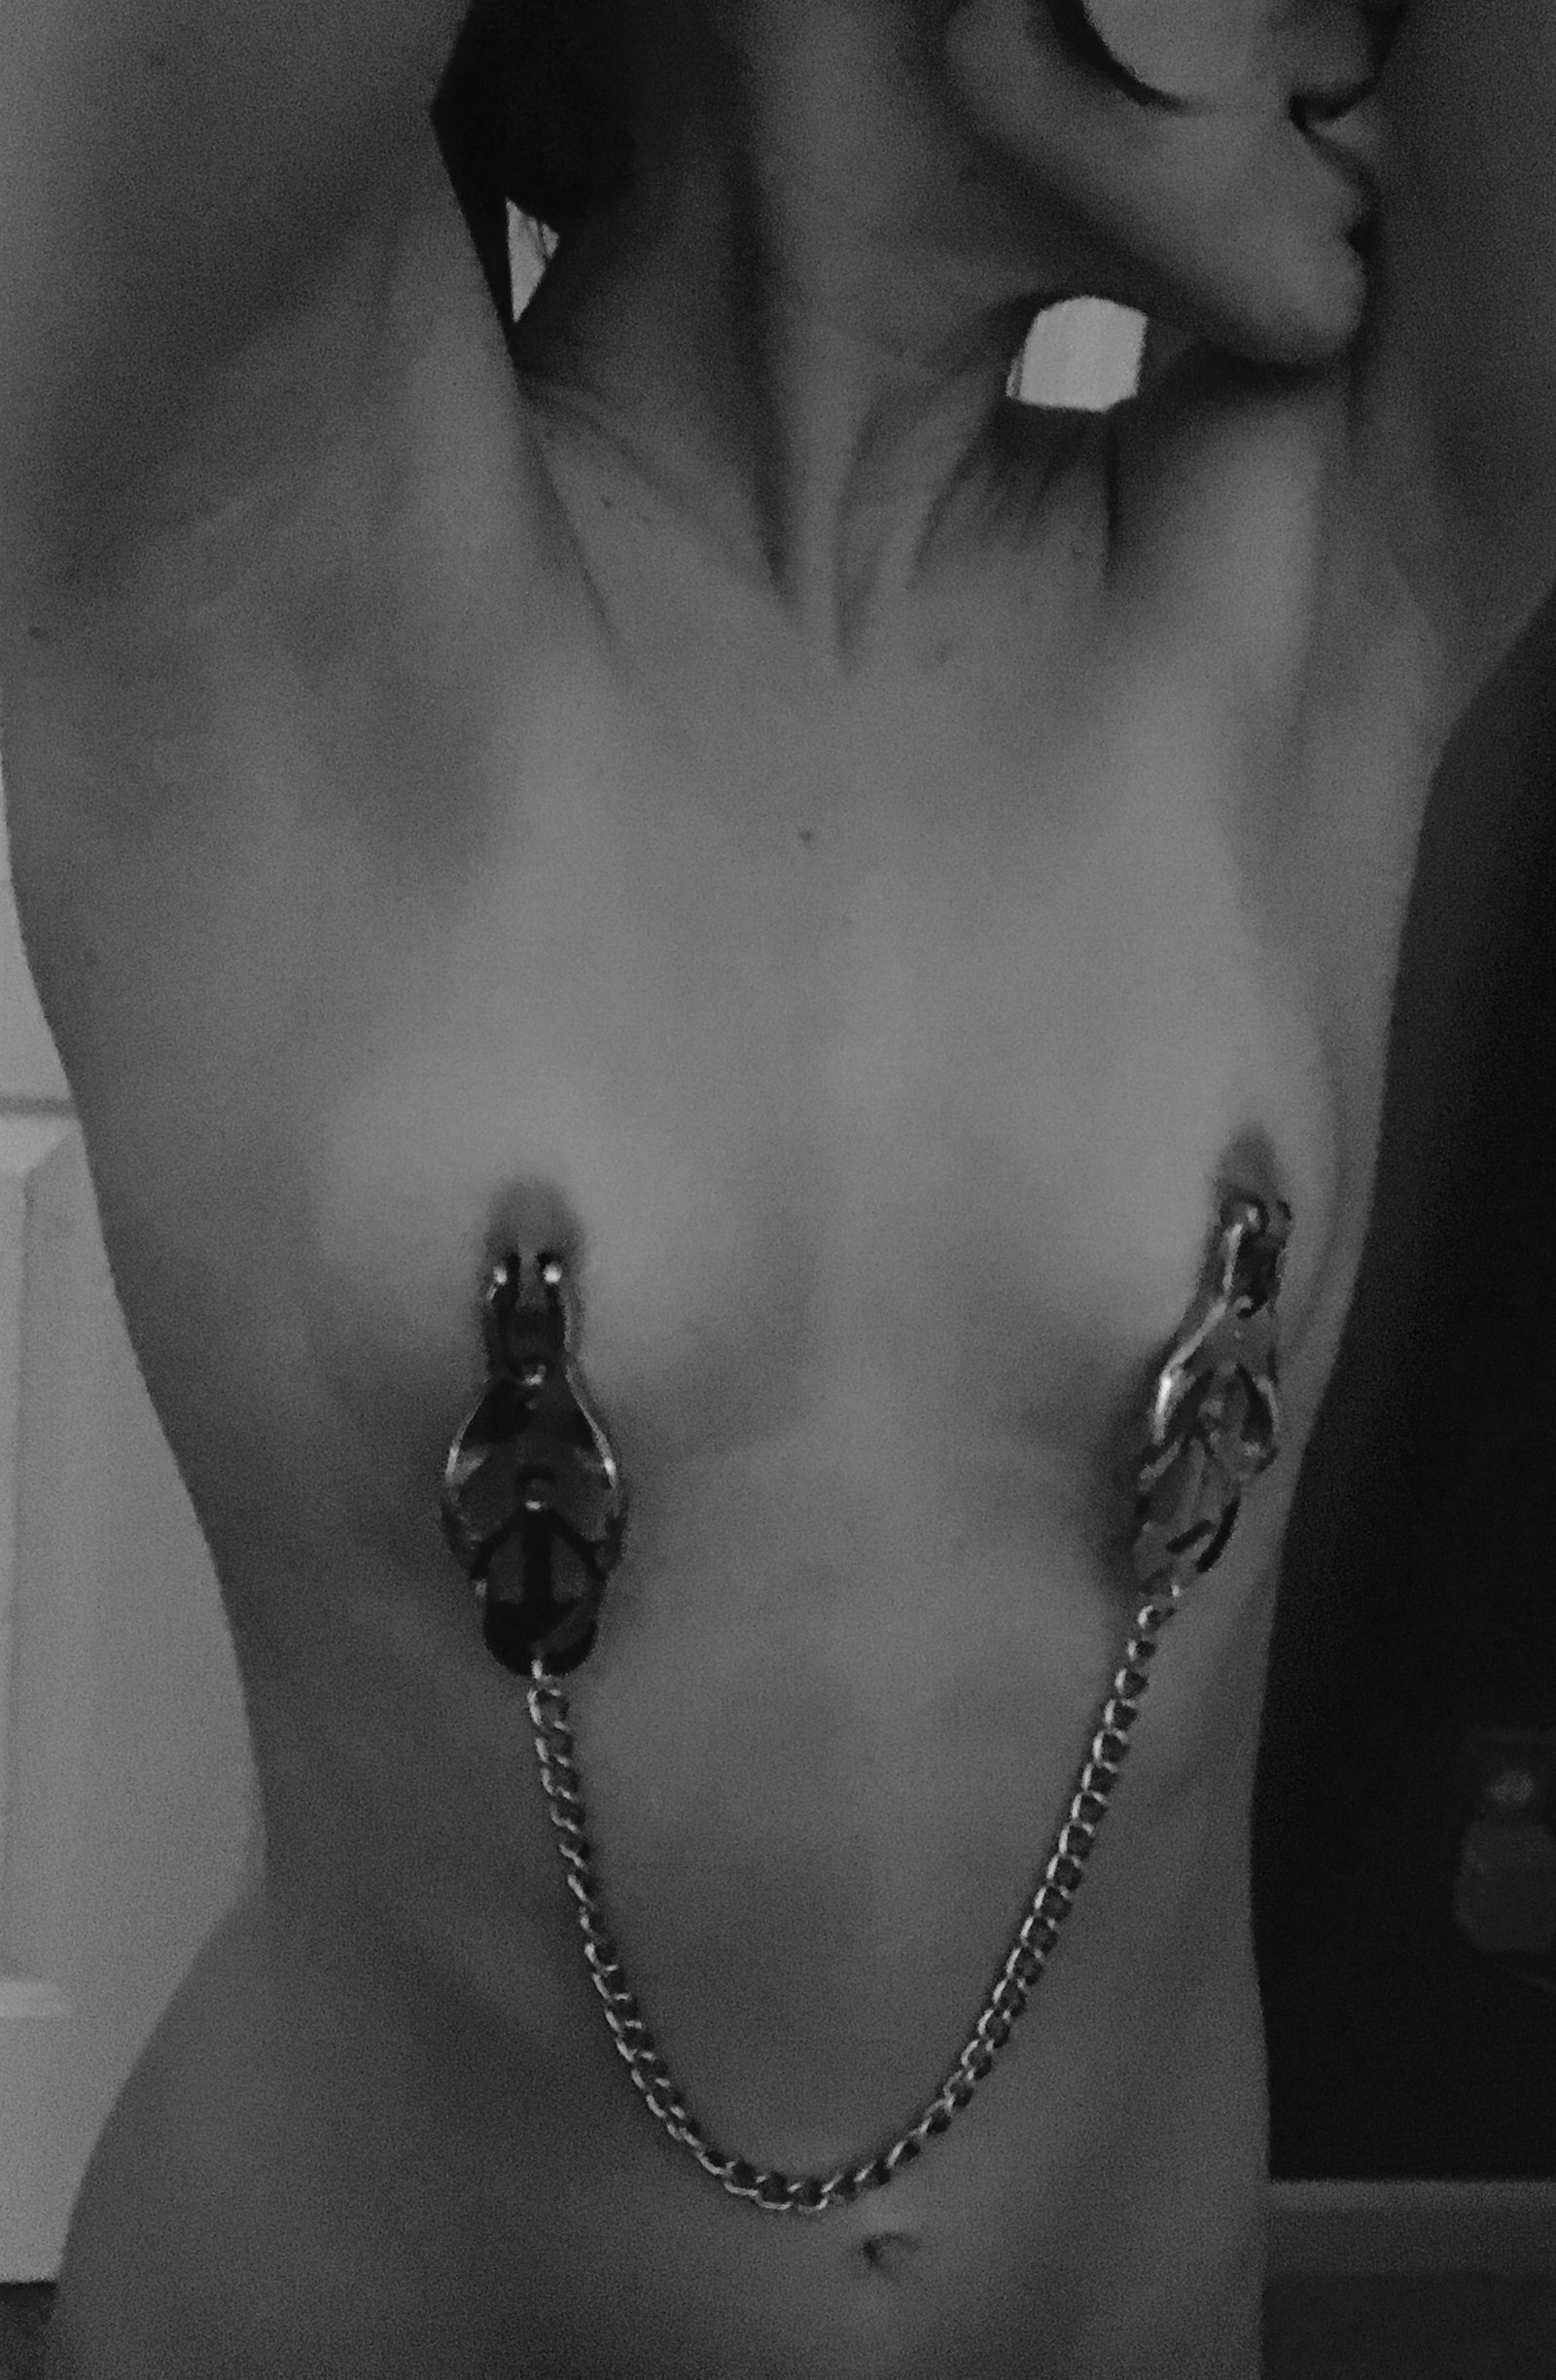 Photo by Classy.Kink with the username @Classy.Kink,  September 30, 2020 at 5:15 PM. The post is about the topic Bondage and the text says 'I love these nipple clamps. #realcouple #amateur #nippleclamps'